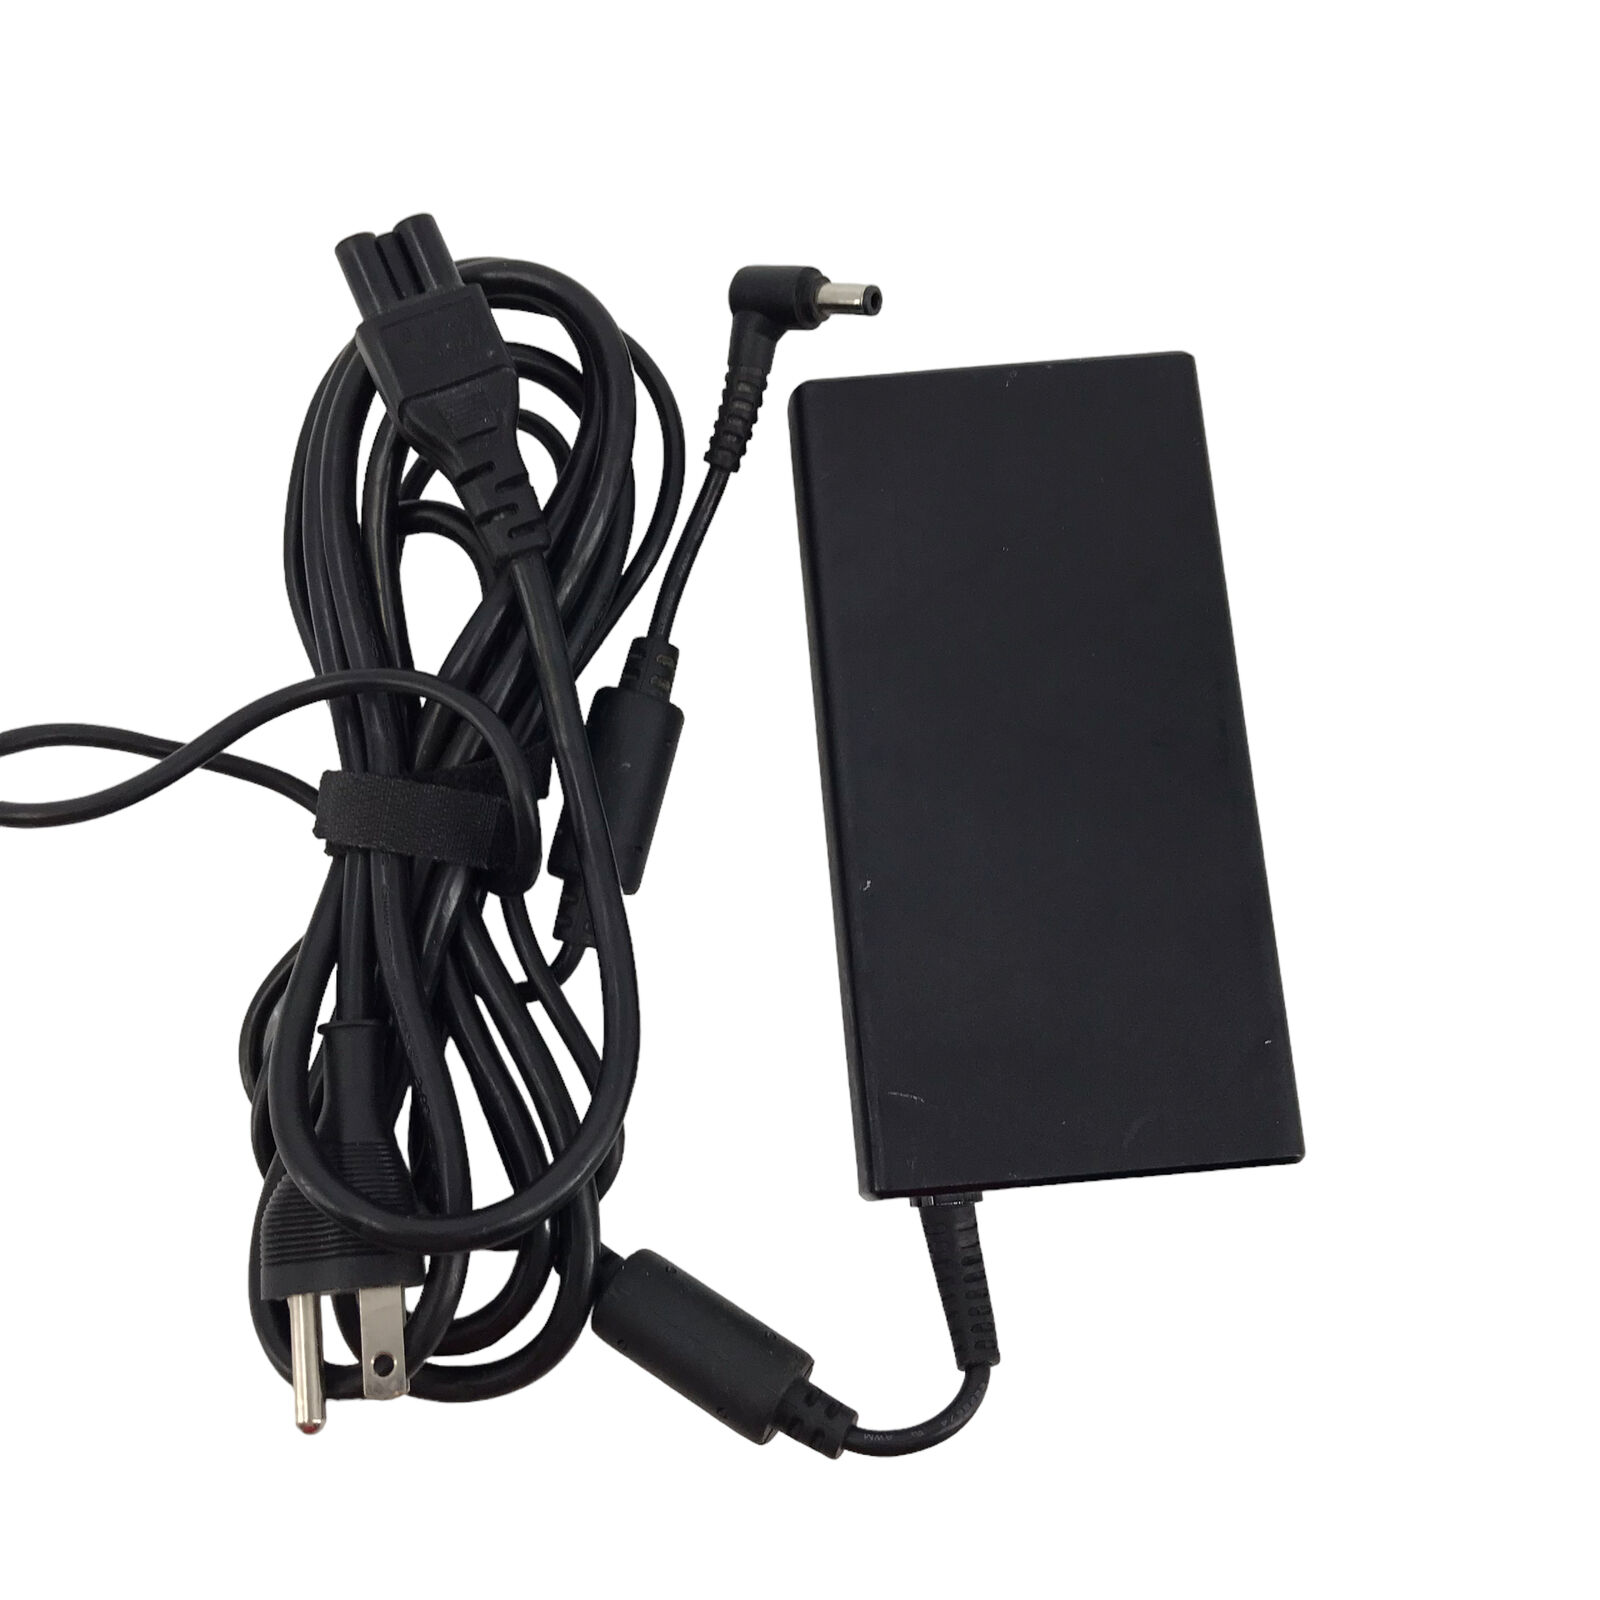 Chicony Acer Laptop Charger AC Power Adapter A17-180P4A 19.5V 9.23A 180W #U1276